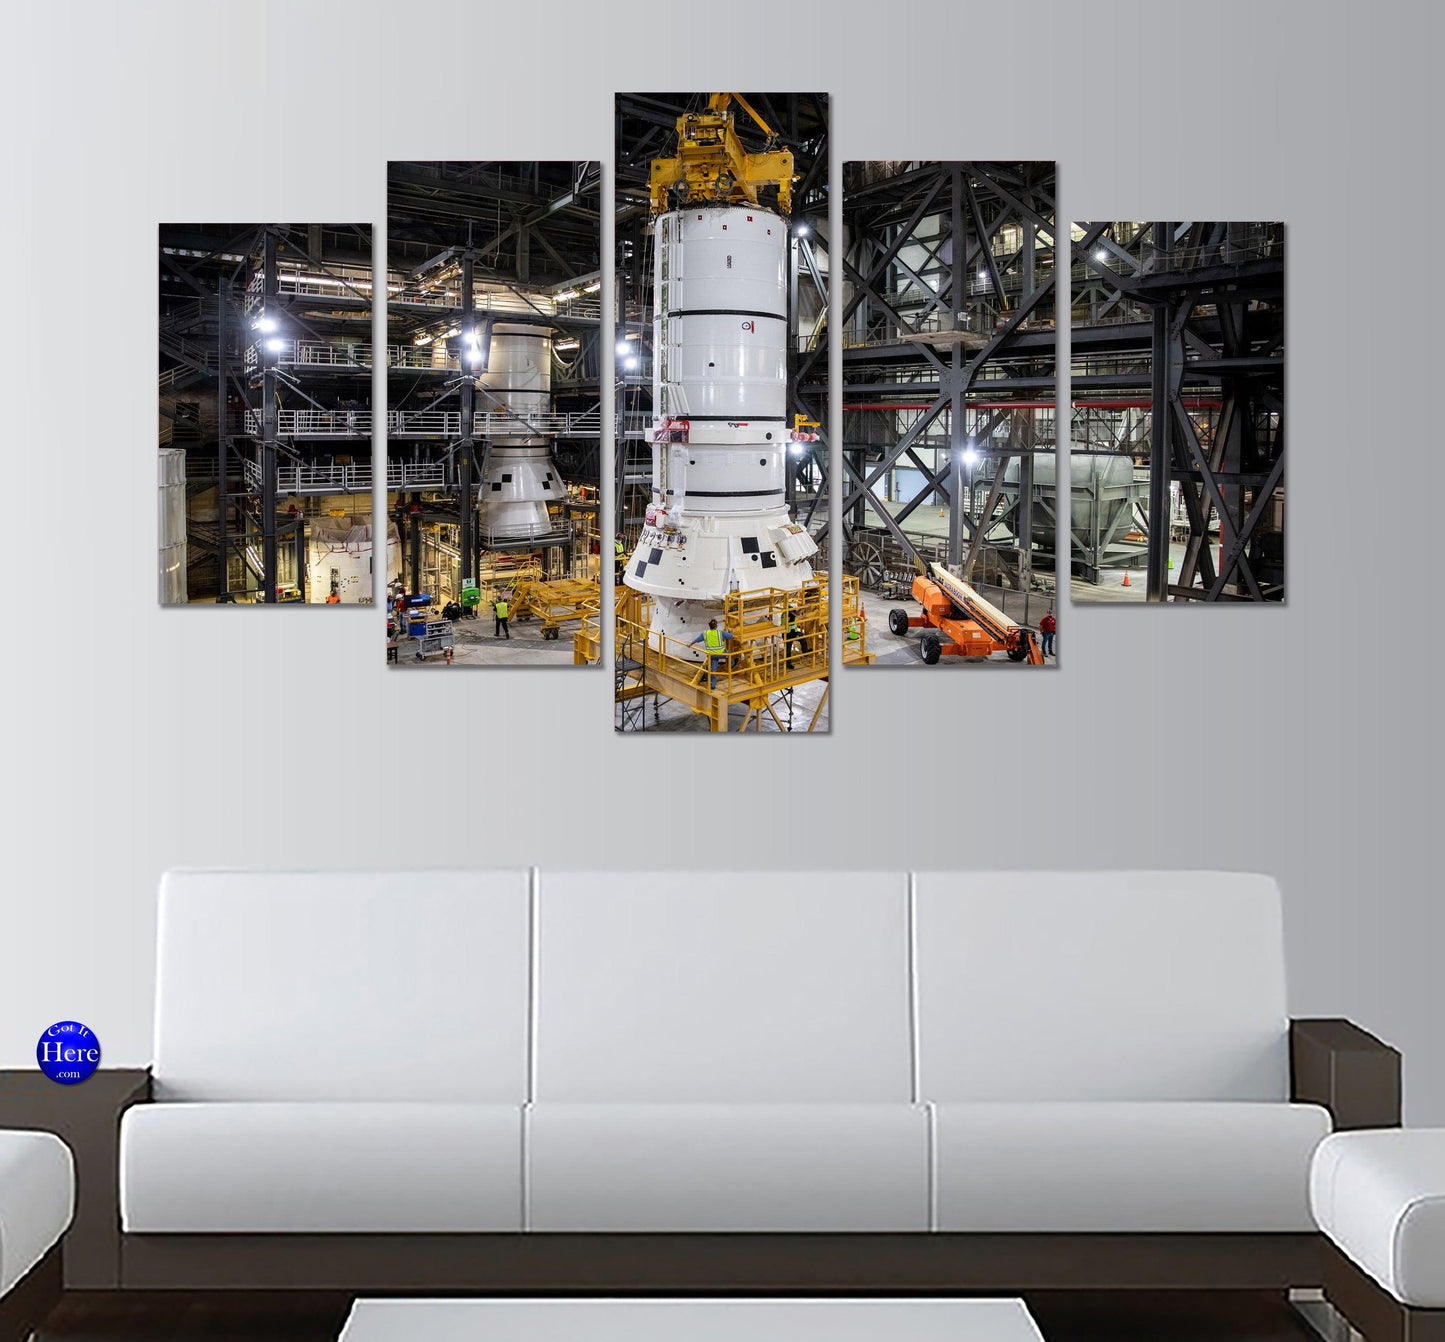 Solid Rocket Boosters Stacking for Artemis I Mission 5 Panel Canvas Print Wall Art - GotItHere.com